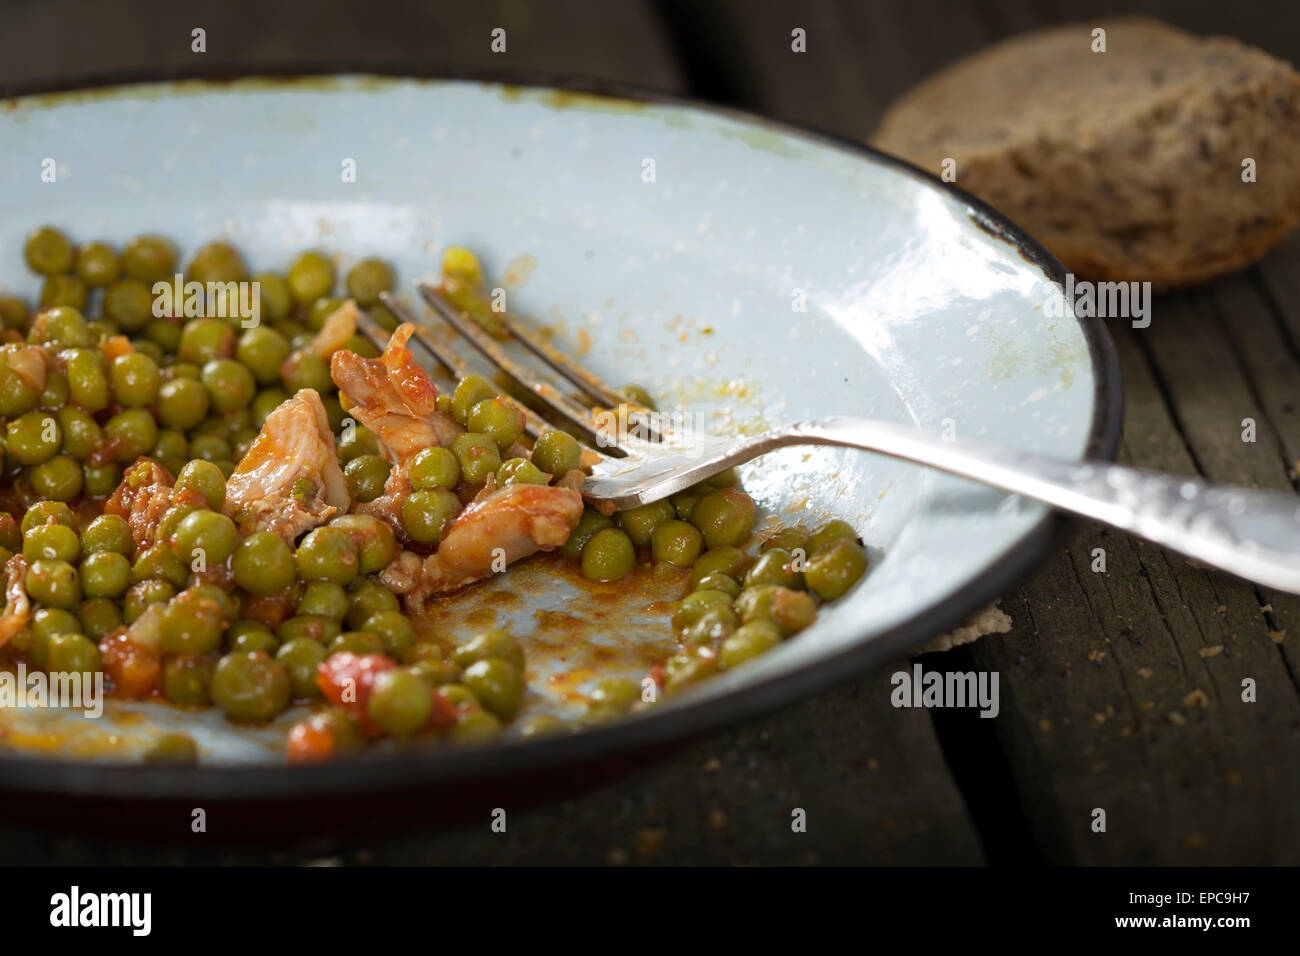 Eating chicken stew with carrots and green peas over wood rustic background Stock Photo